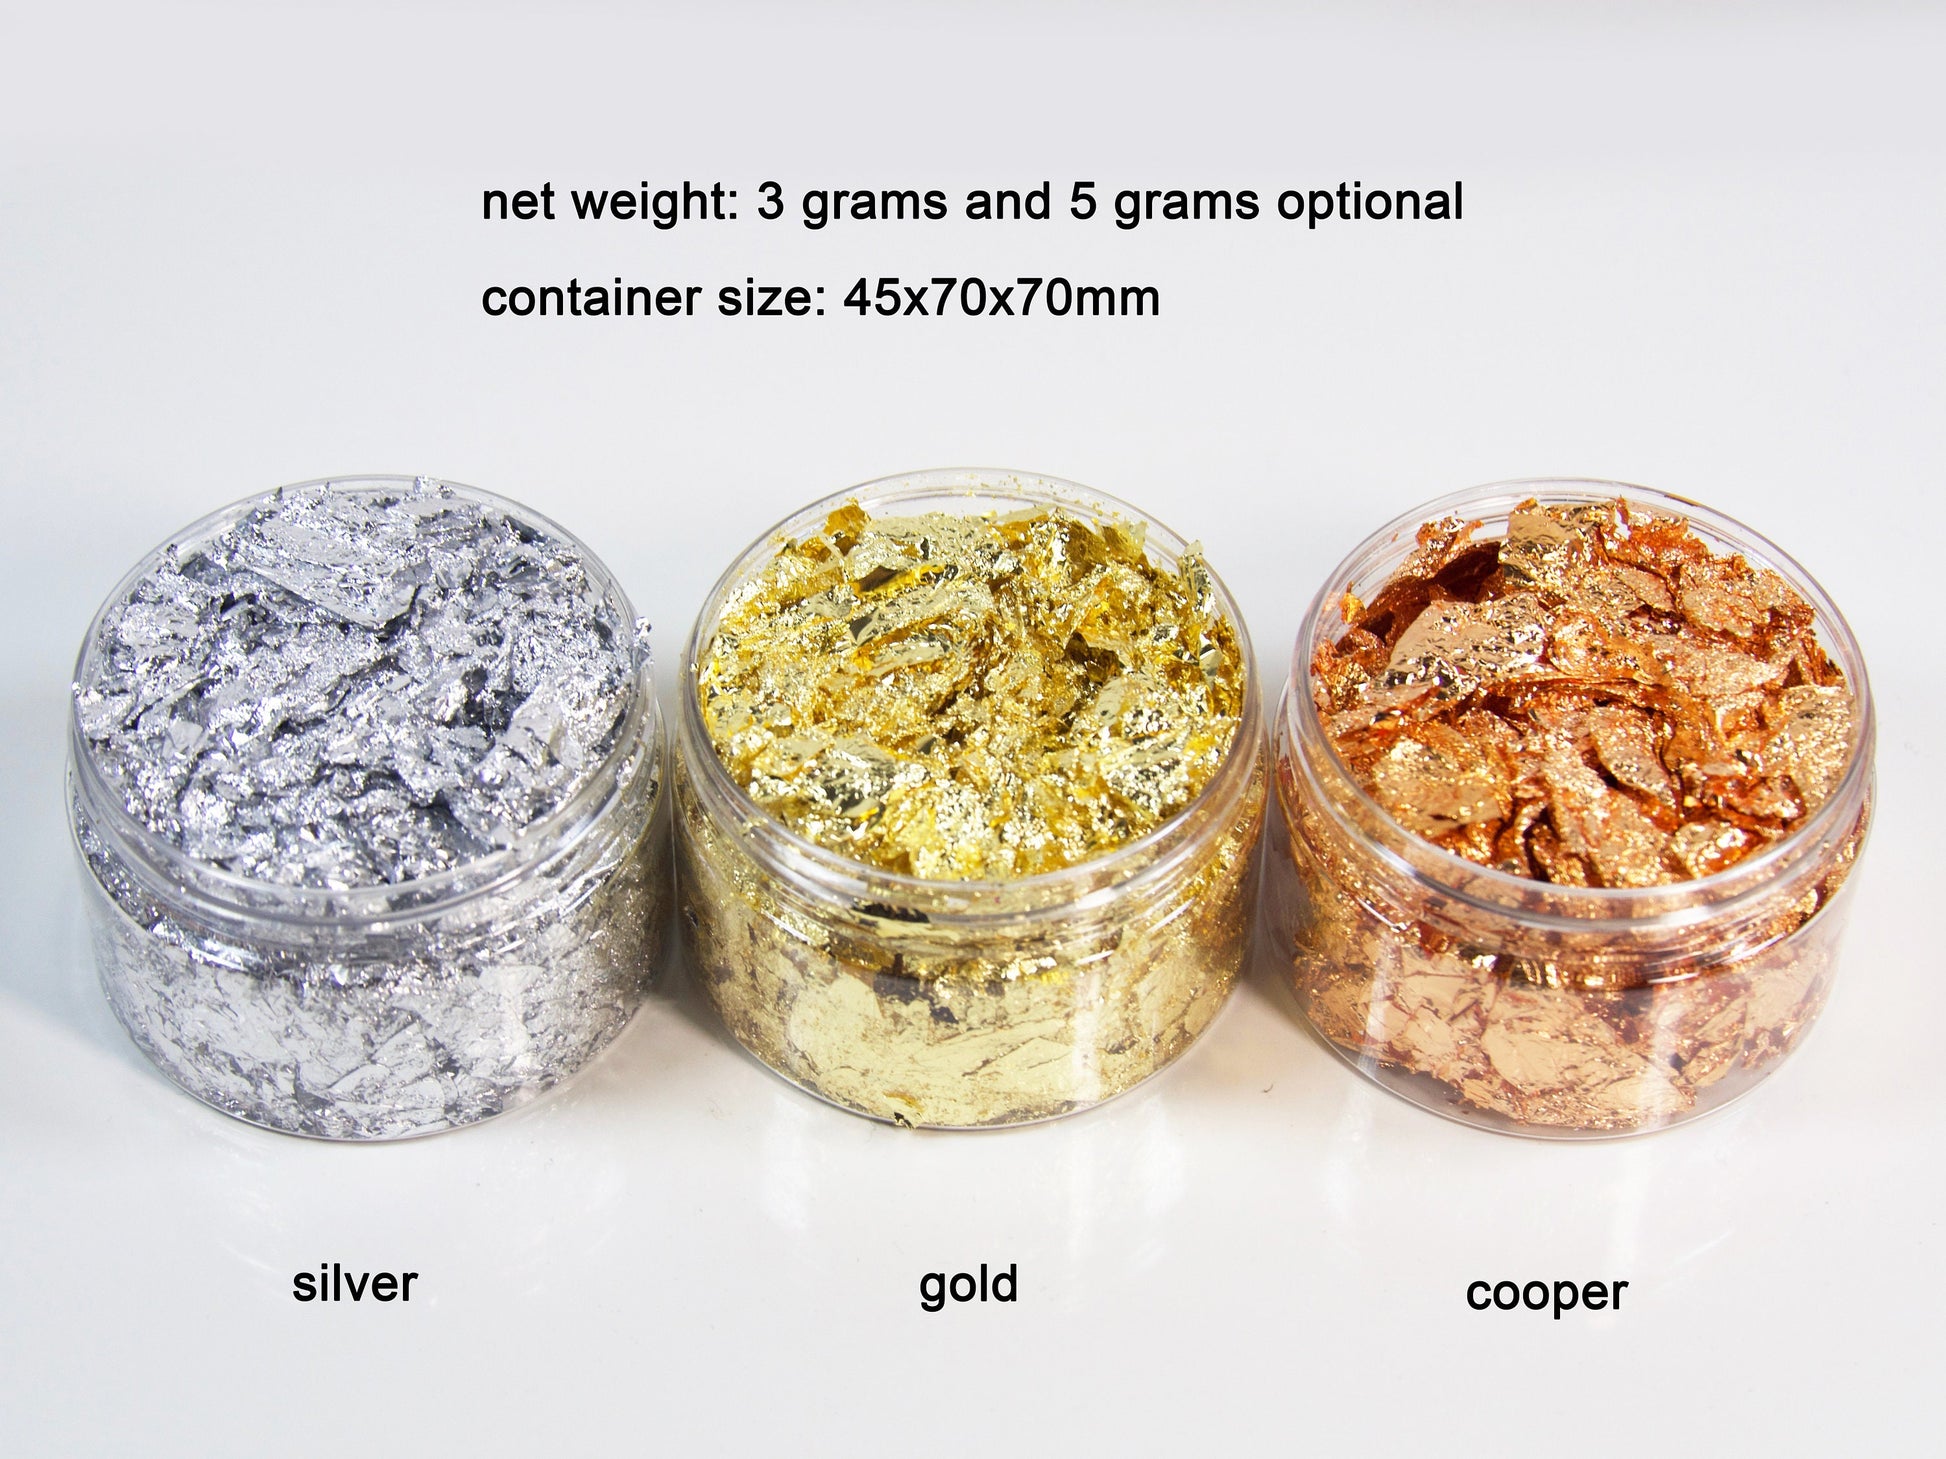 Wholesale Colorful Gold Silver Metallic Leaf Foil Flakes For Nail